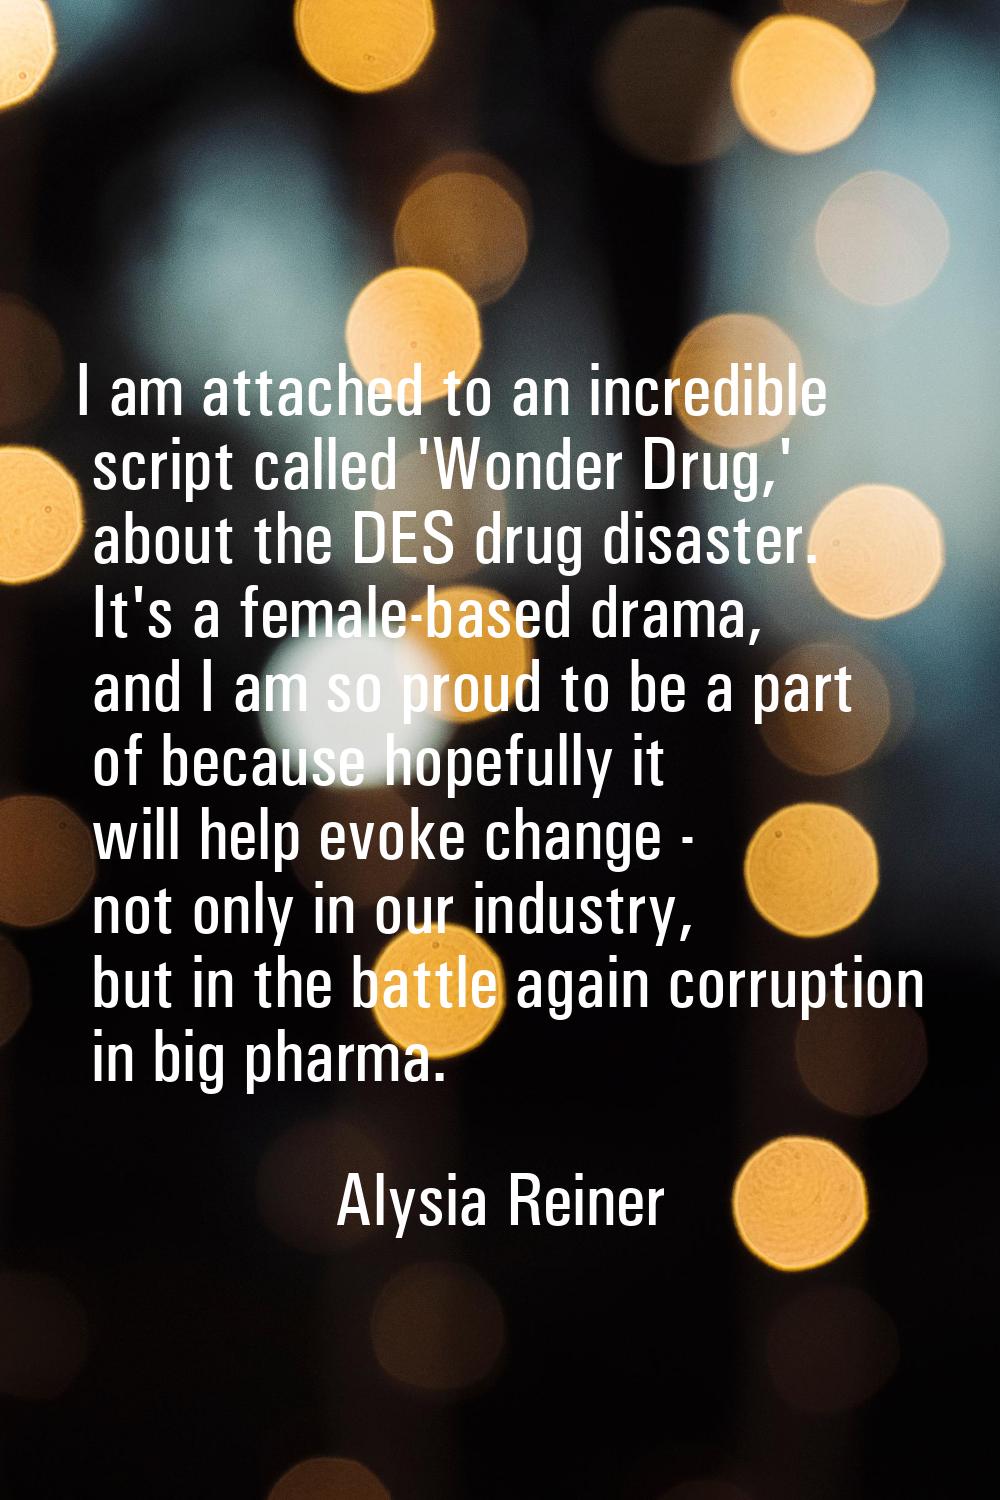 I am attached to an incredible script called 'Wonder Drug,' about the DES drug disaster. It's a fem